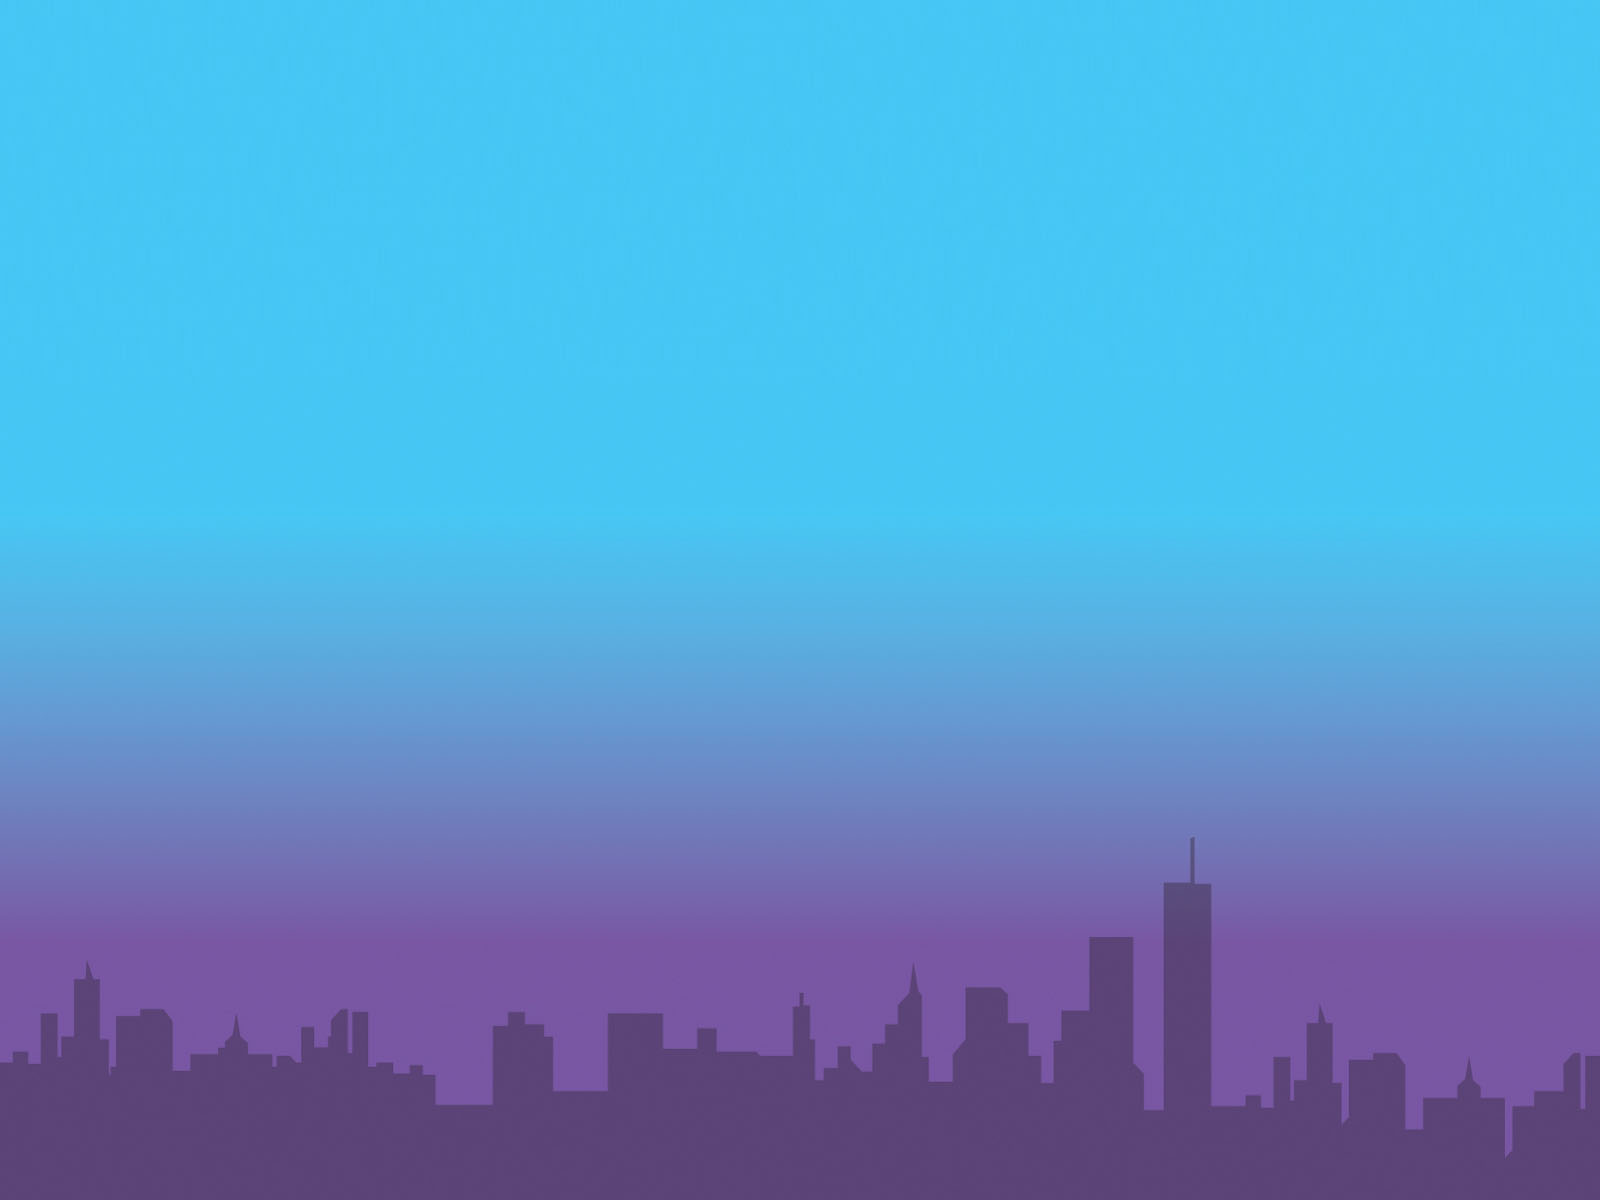 purple and blue powerpoint background